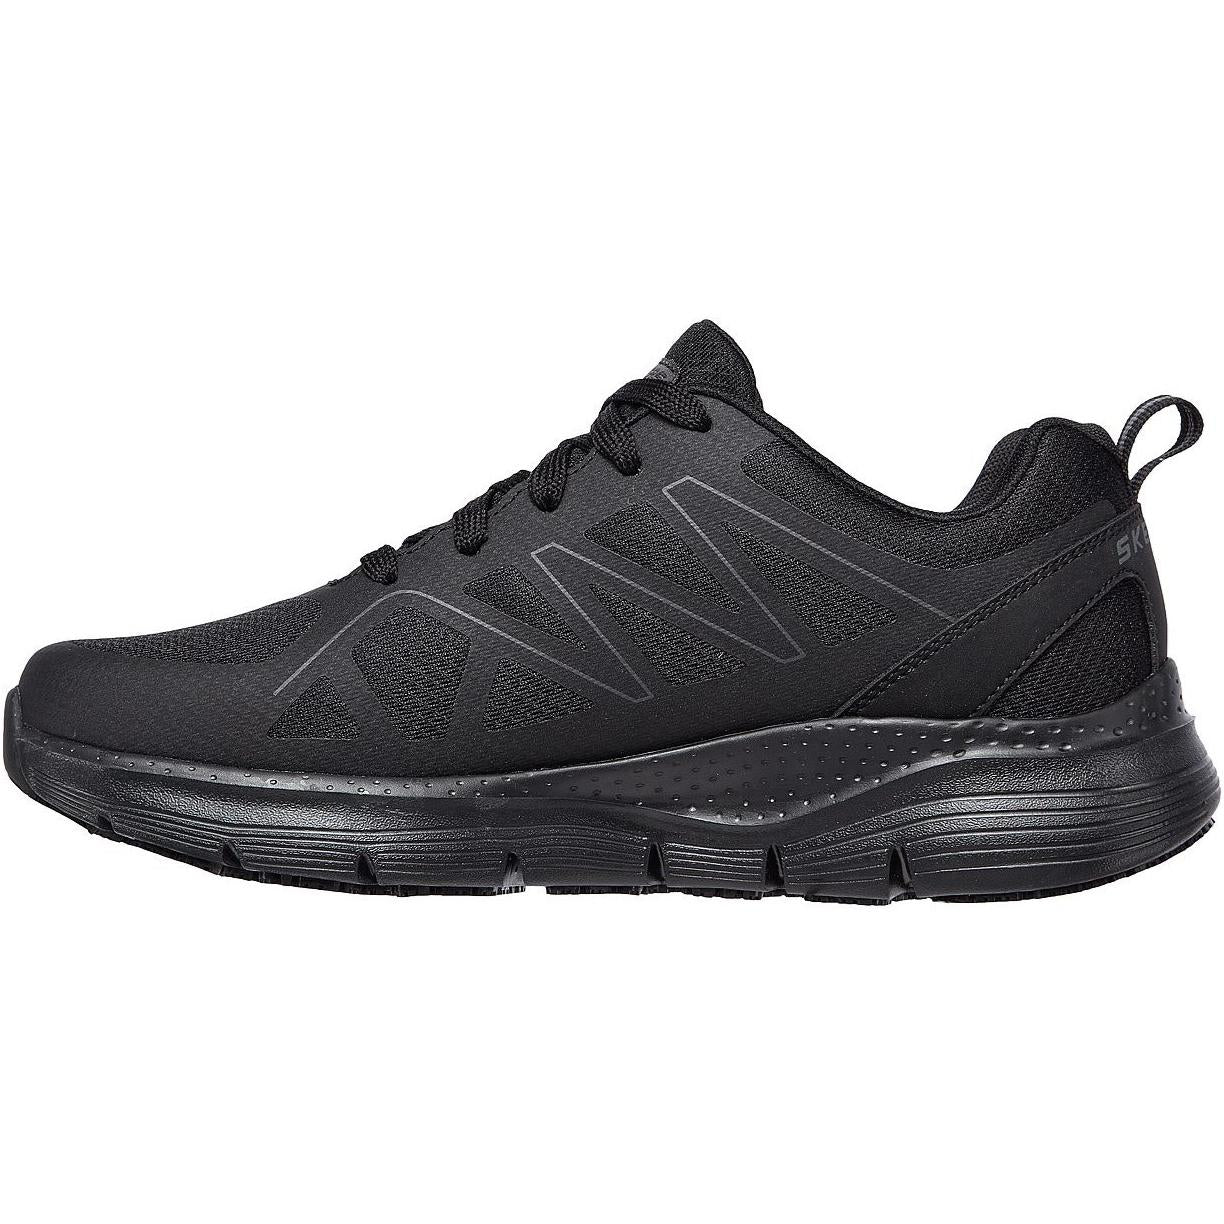 Skechers Arch Fit SR Axtell Occupational Shoe